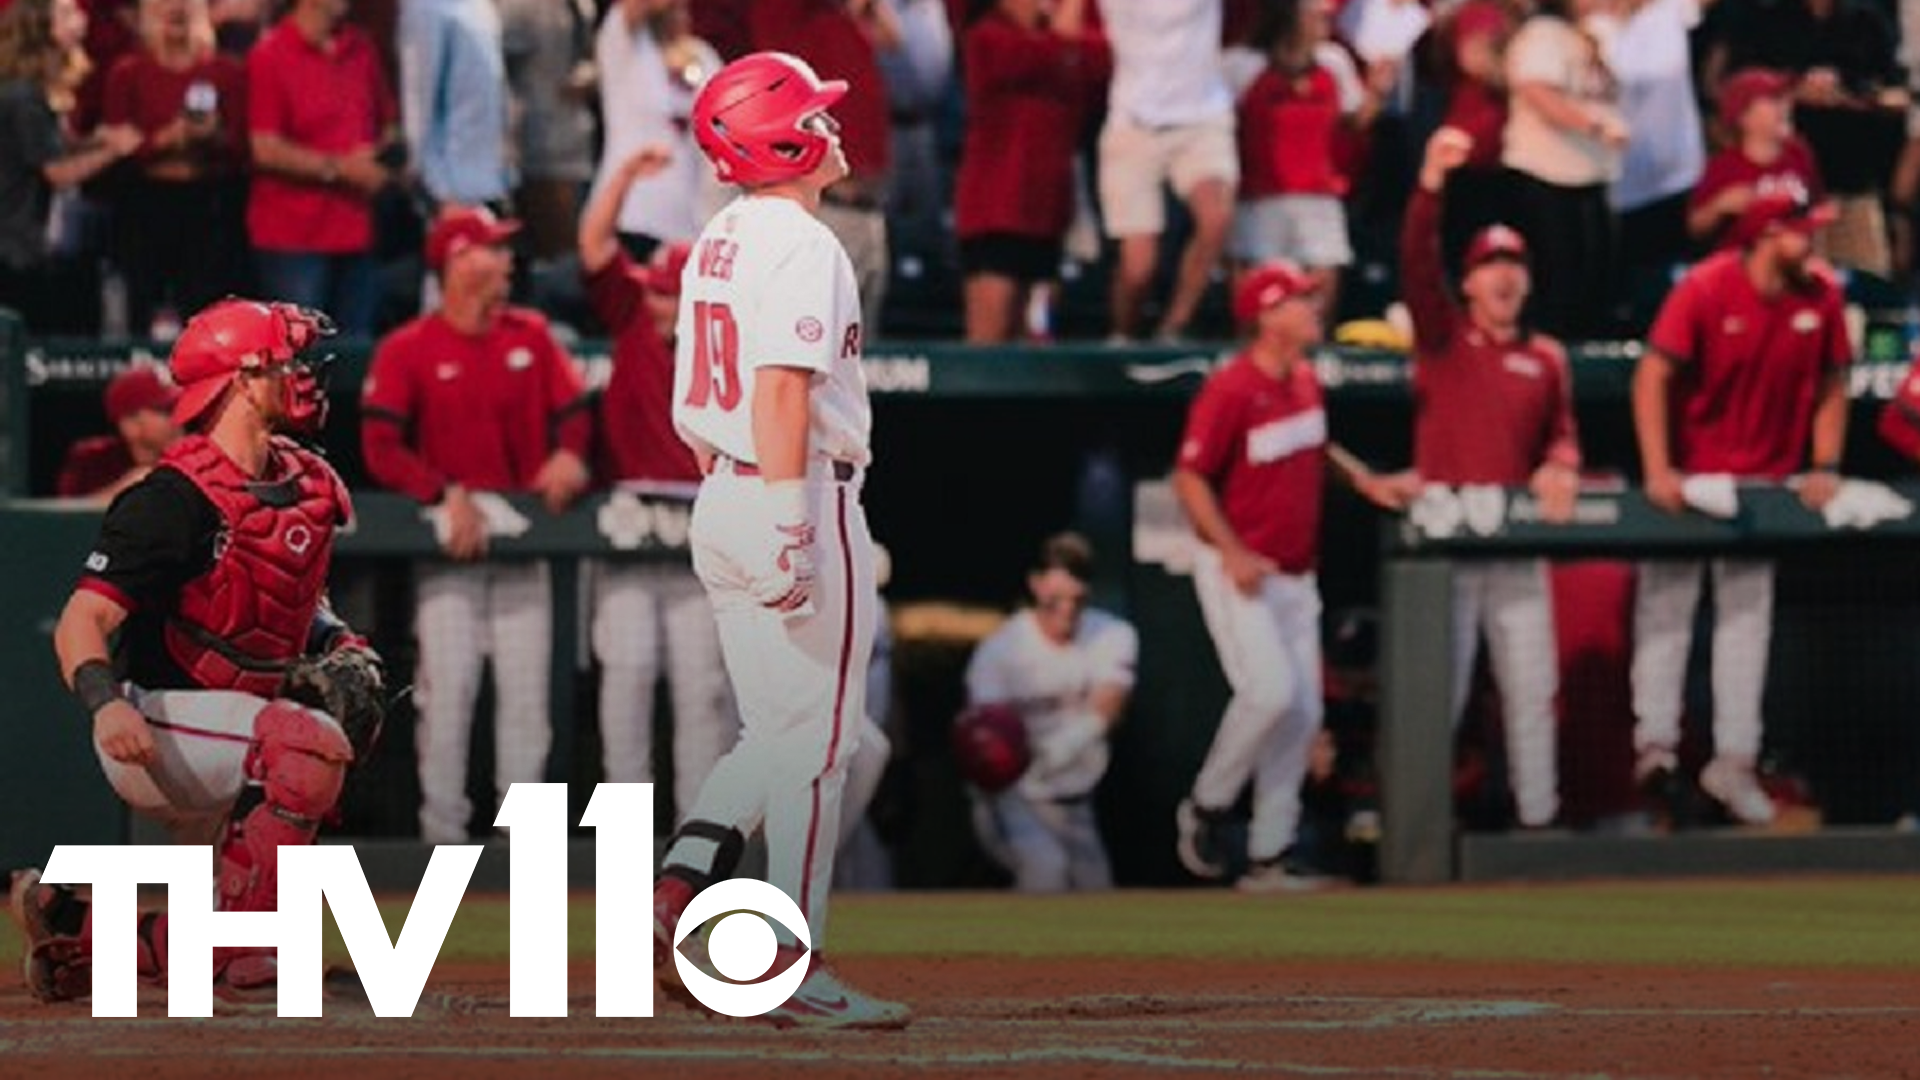 Kevin Kopps pitched a career-high 7 innings and Charlie Welch hit a pinch-hit three-run home run in the 8th to send the Razorbacks to the Super Regionals